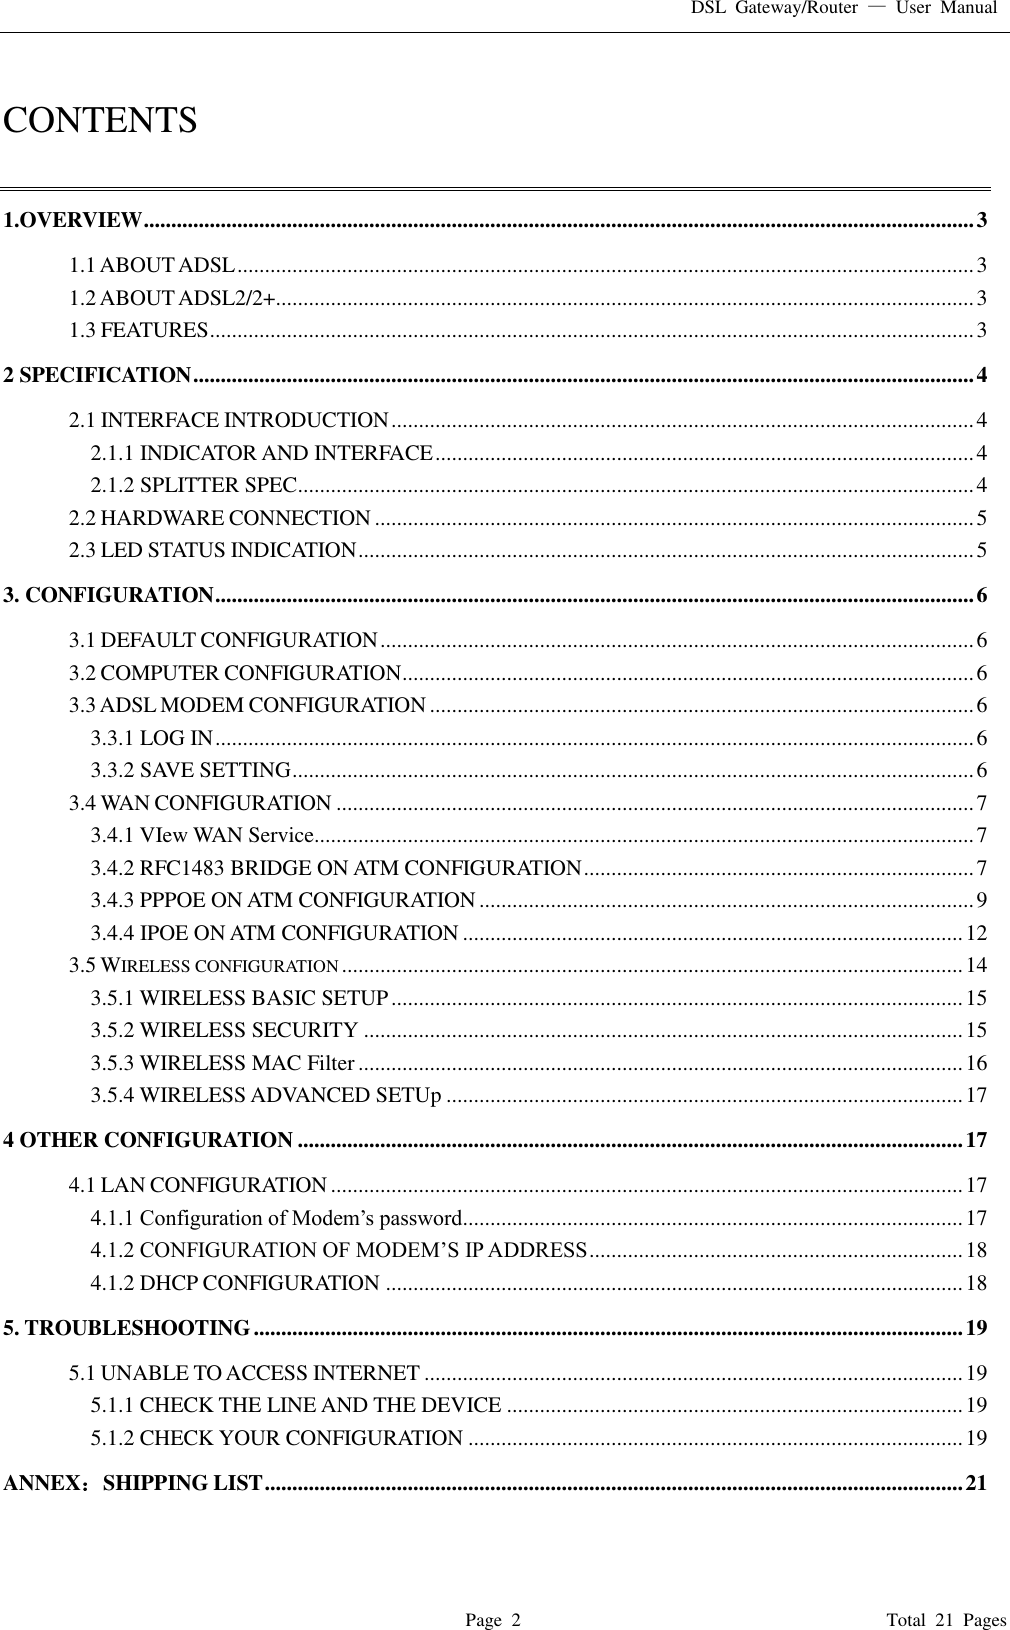 DSL  Gateway/Router  —  User  Manual   Page  2                                                                              Total  21  Pages  CONTENTS  1.OVERVIEW ....................................................................................................................................................... 3 1.1 ABOUT ADSL ...................................................................................................................................... 3 1.2 ABOUT ADSL2/2+ ............................................................................................................................... 3 1.3 FEATURES ........................................................................................................................................... 3 2 SPECIFICATION .............................................................................................................................................. 4 2.1 INTERFACE INTRODUCTION .......................................................................................................... 4 2.1.1 INDICATOR AND INTERFACE .................................................................................................. 4 2.1.2 SPLITTER SPEC ........................................................................................................................... 4 2.2 HARDWARE CONNECTION ............................................................................................................. 5 2.3 LED STATUS INDICATION ................................................................................................................ 5 3. CONFIGURATION .......................................................................................................................................... 6 3.1 DEFAULT CONFIGURATION ............................................................................................................ 6 3.2 COMPUTER CONFIGURATION ........................................................................................................ 6 3.3 ADSL MODEM CONFIGURATION ................................................................................................... 6 3.3.1 LOG IN .......................................................................................................................................... 6 3.3.2 SAVE SETTING ............................................................................................................................ 6 3.4 WAN CONFIGURATION .................................................................................................................... 7 3.4.1 VIew WAN Service........................................................................................................................ 7 3.4.2 RFC1483 BRIDGE ON ATM CONFIGURATION ....................................................................... 7 3.4.3 PPPOE ON ATM CONFIGURATION .......................................................................................... 9 3.4.4 IPOE ON ATM CONFIGURATION ........................................................................................... 12 3.5 WIRELESS CONFIGURATION ................................................................................................................. 14 3.5.1 WIRELESS BASIC SETUP ........................................................................................................ 15 3.5.2 WIRELESS SECURITY ............................................................................................................. 15 3.5.3 WIRELESS MAC Filter .............................................................................................................. 16 3.5.4 WIRELESS ADVANCED SETUp .............................................................................................. 17 4 OTHER CONFIGURATION ......................................................................................................................... 17 4.1 LAN CONFIGURATION ................................................................................................................... 17 4.1.1 Configuration of Modem’s password........................................................................................... 17 4.1.2 CONFIGURATION OF MODEM’S IP ADDRESS .................................................................... 18 4.1.2 DHCP CONFIGURATION ......................................................................................................... 18 5. TROUBLESHOOTING ................................................................................................................................. 19 5.1 UNABLE TO ACCESS INTERNET .................................................................................................. 19 5.1.1 CHECK THE LINE AND THE DEVICE ................................................................................... 19 5.1.2 CHECK YOUR CONFIGURATION .......................................................................................... 19 ANNEX：SHIPPING LIST ............................................................................................................................... 21 